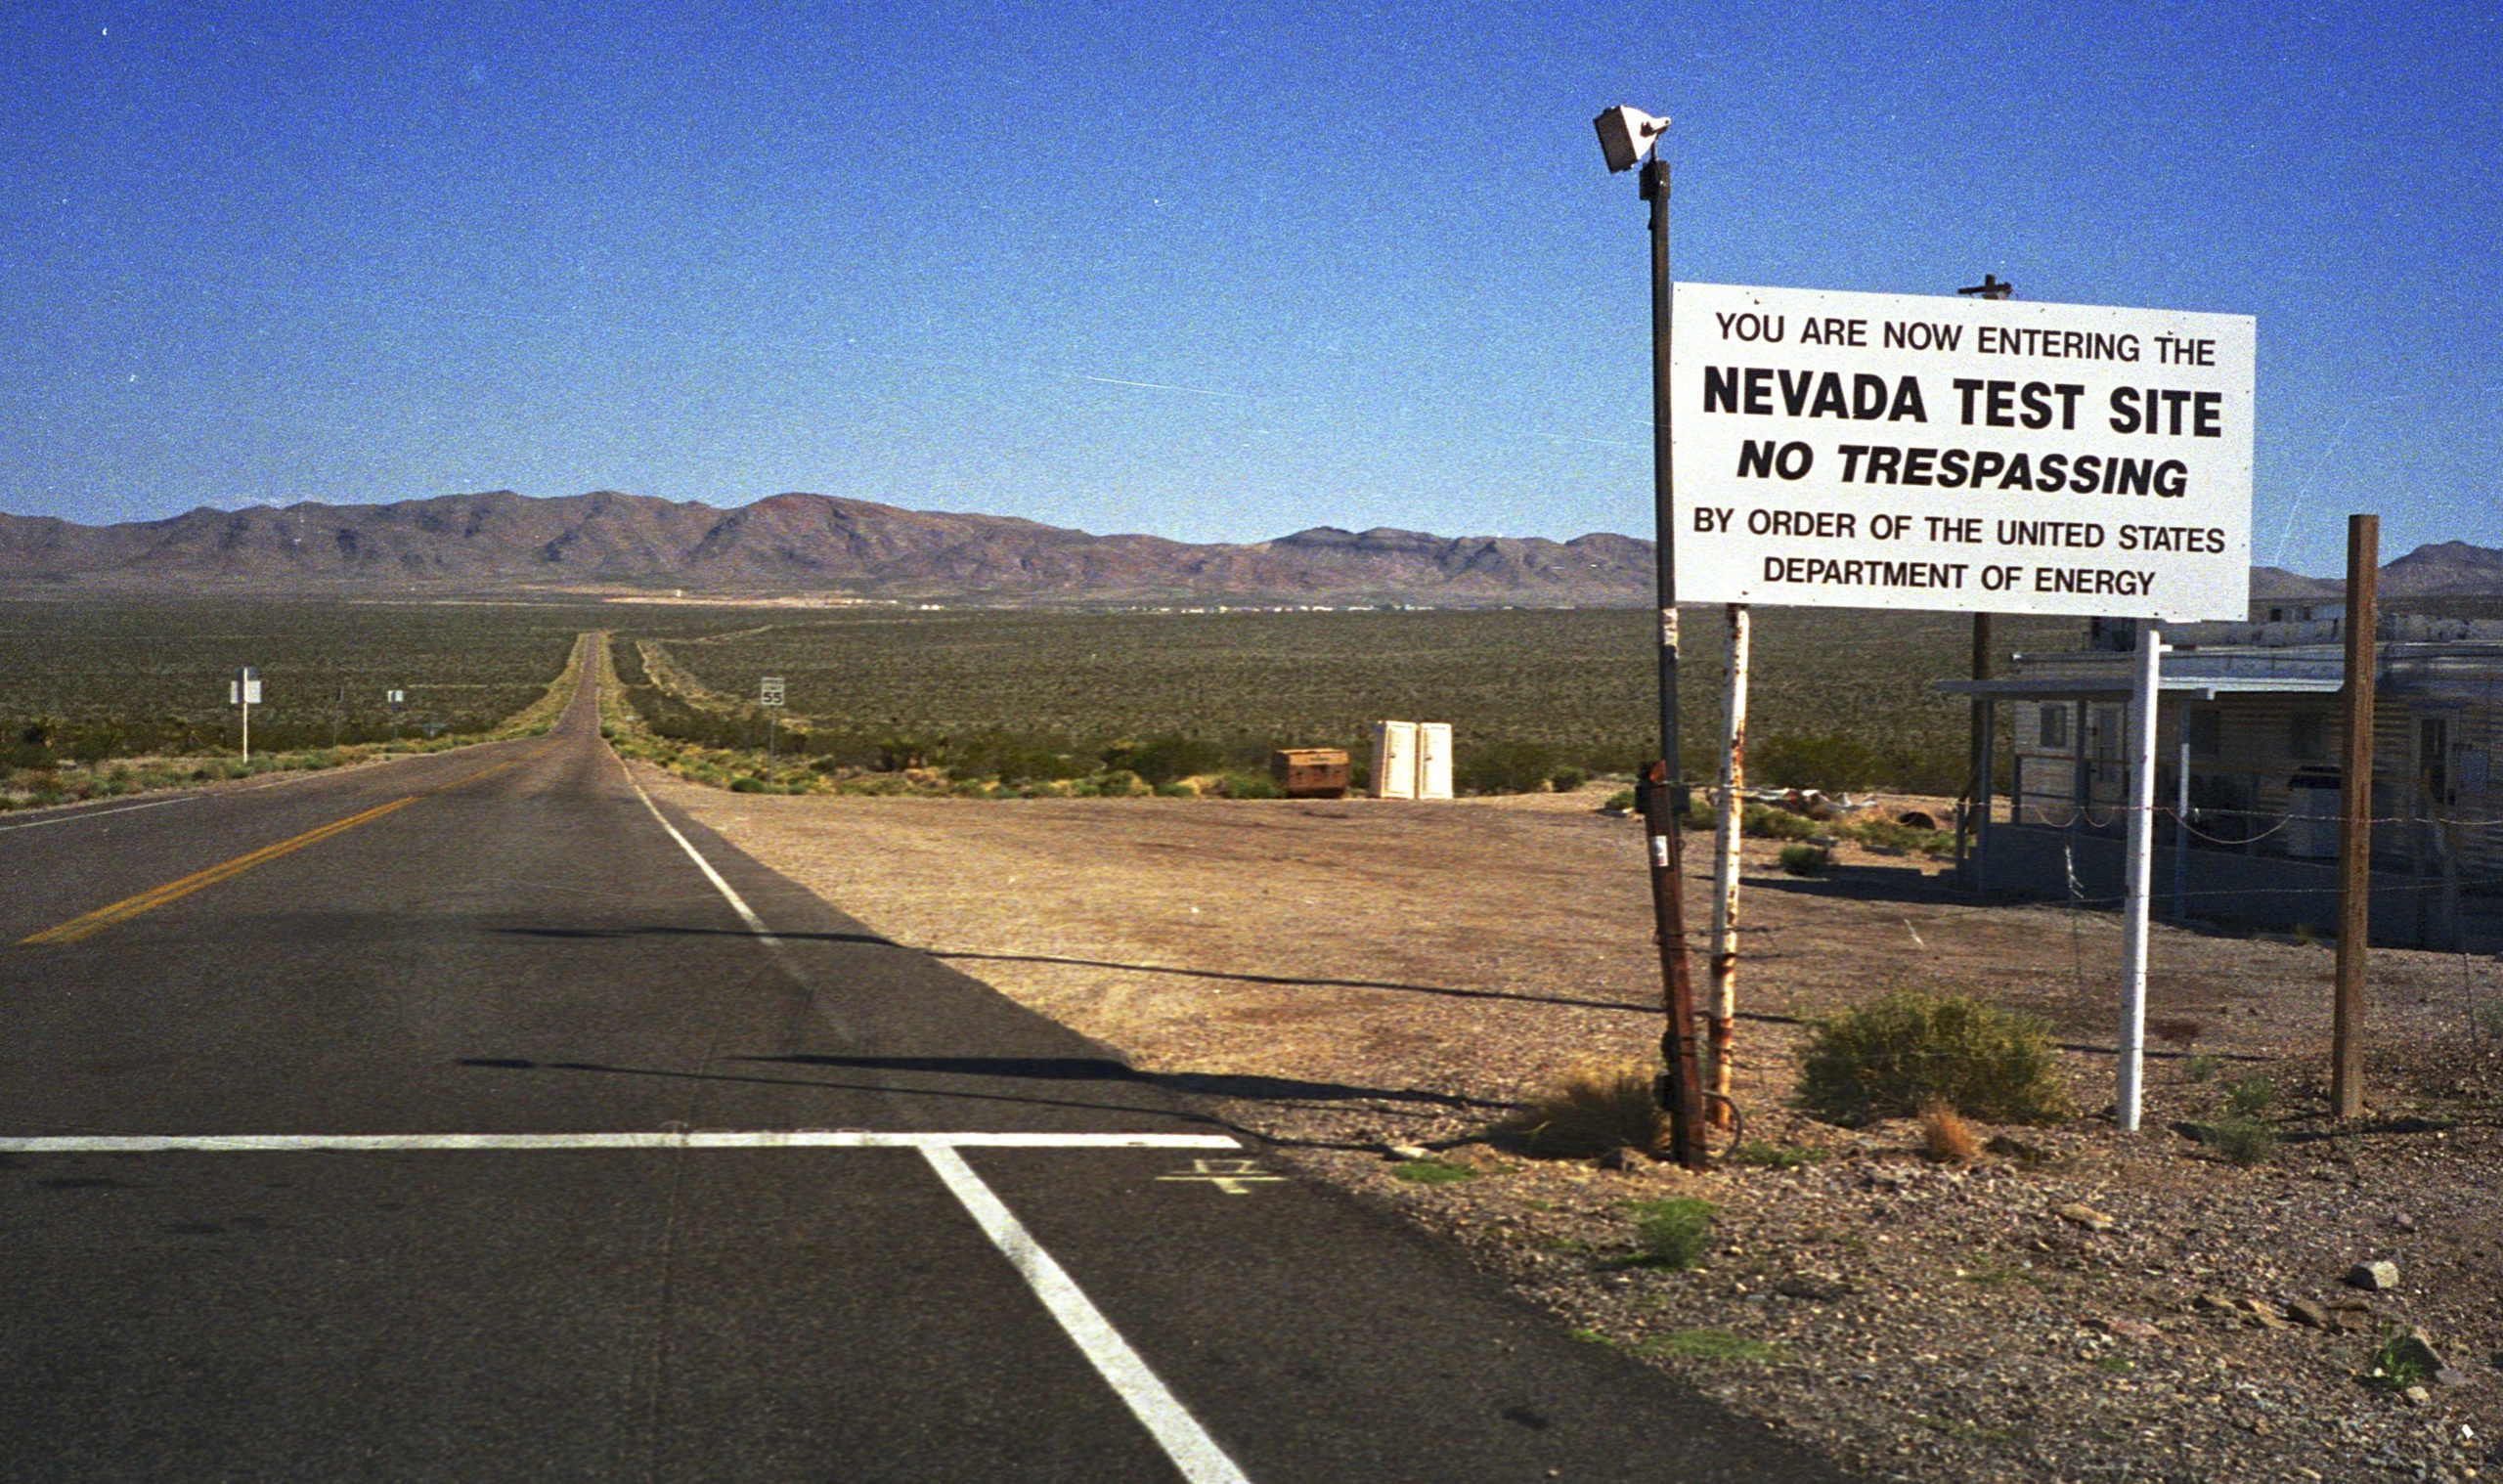 Entrance to the Nevada test site - photo credit Casy BissonFlickr